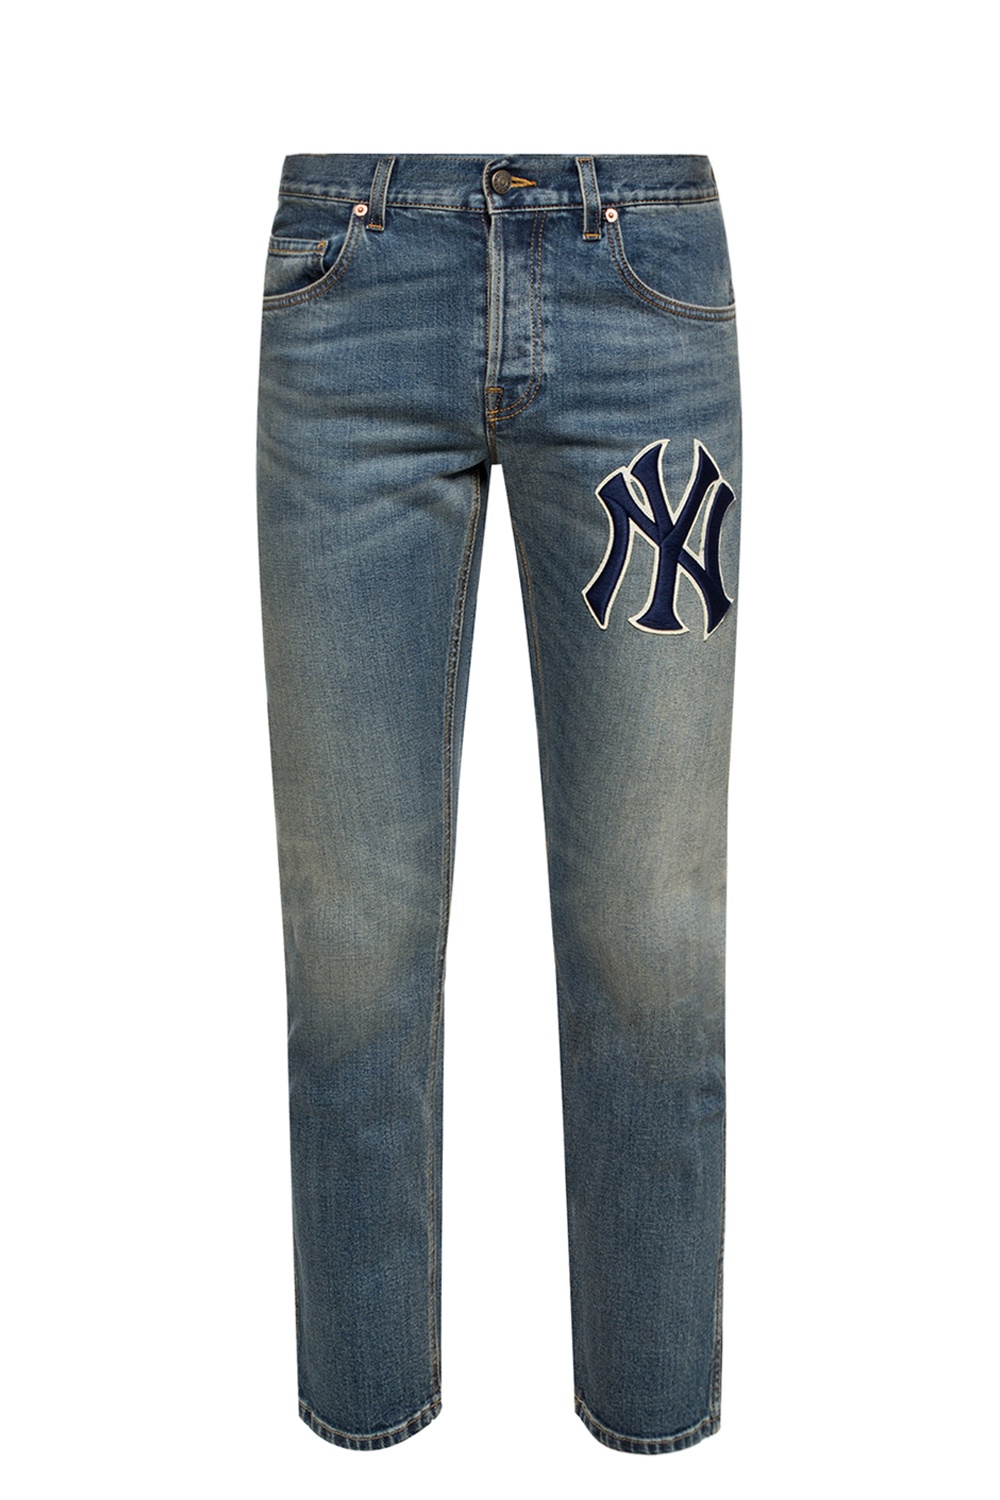 Gucci 'NY Yankees™' jeans, Men's Clothing